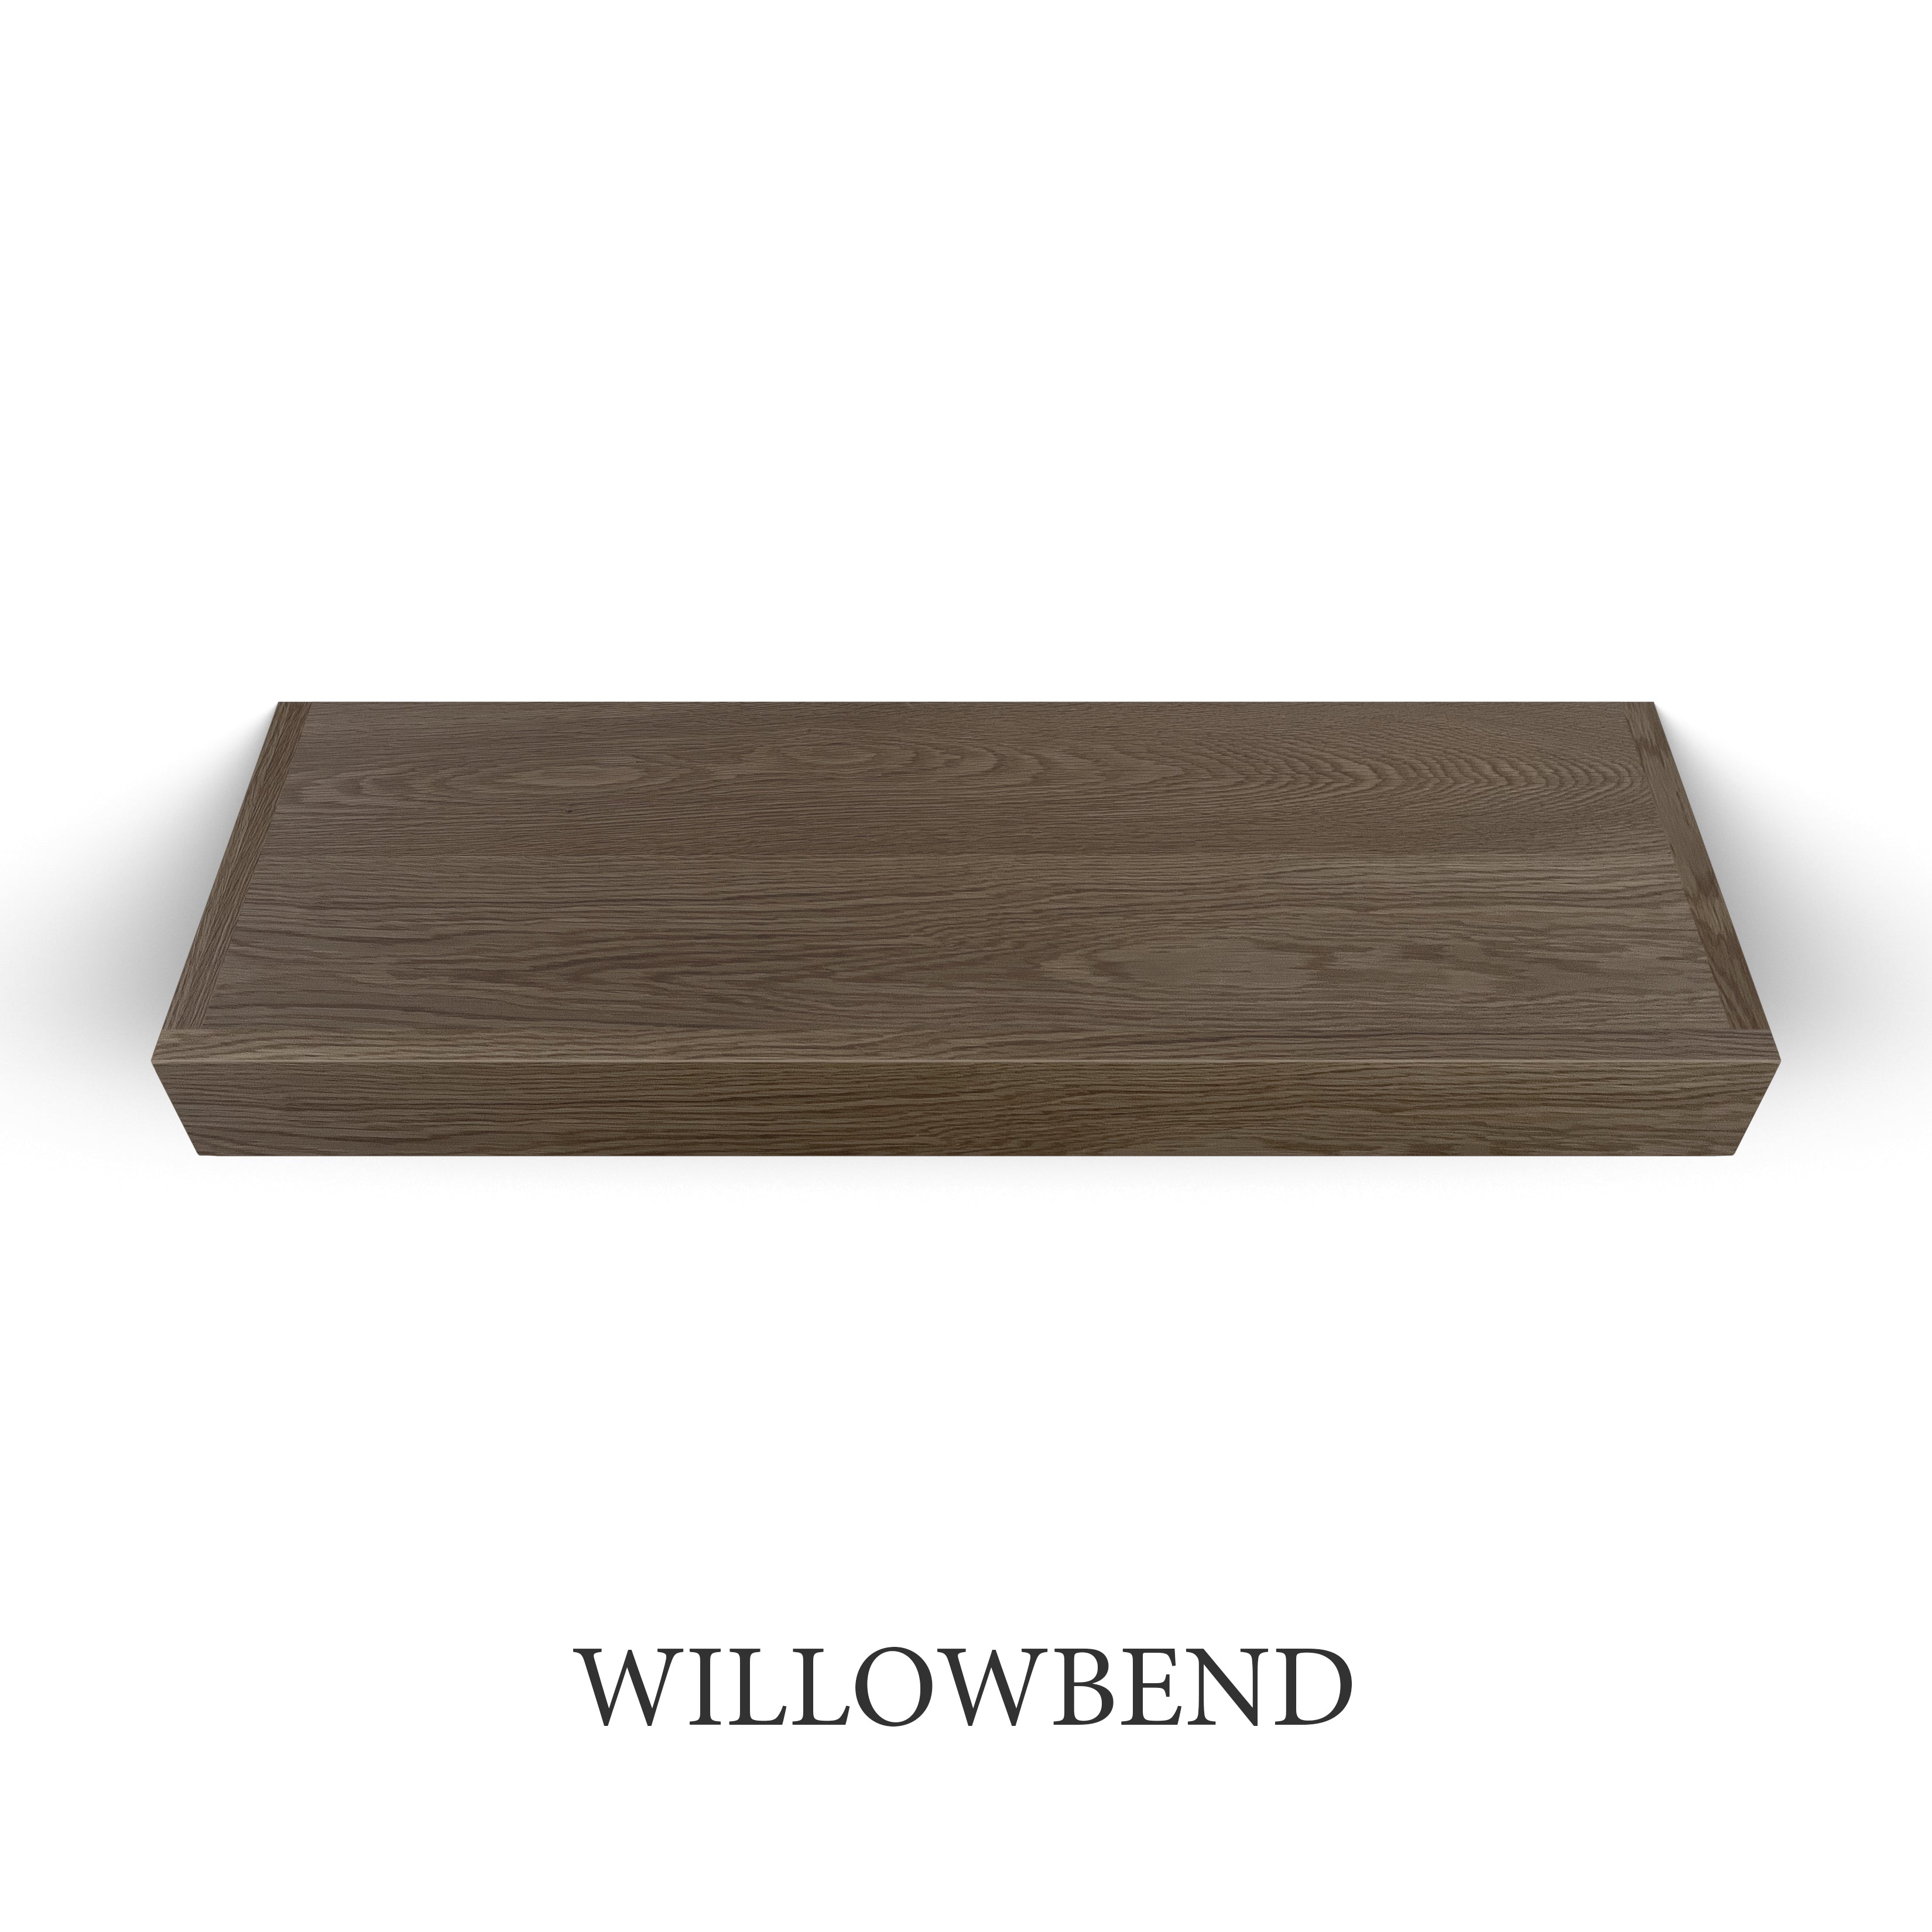 willowbend White Oak 3 Inch Thick LED Lighted Floating Shelf - Battery